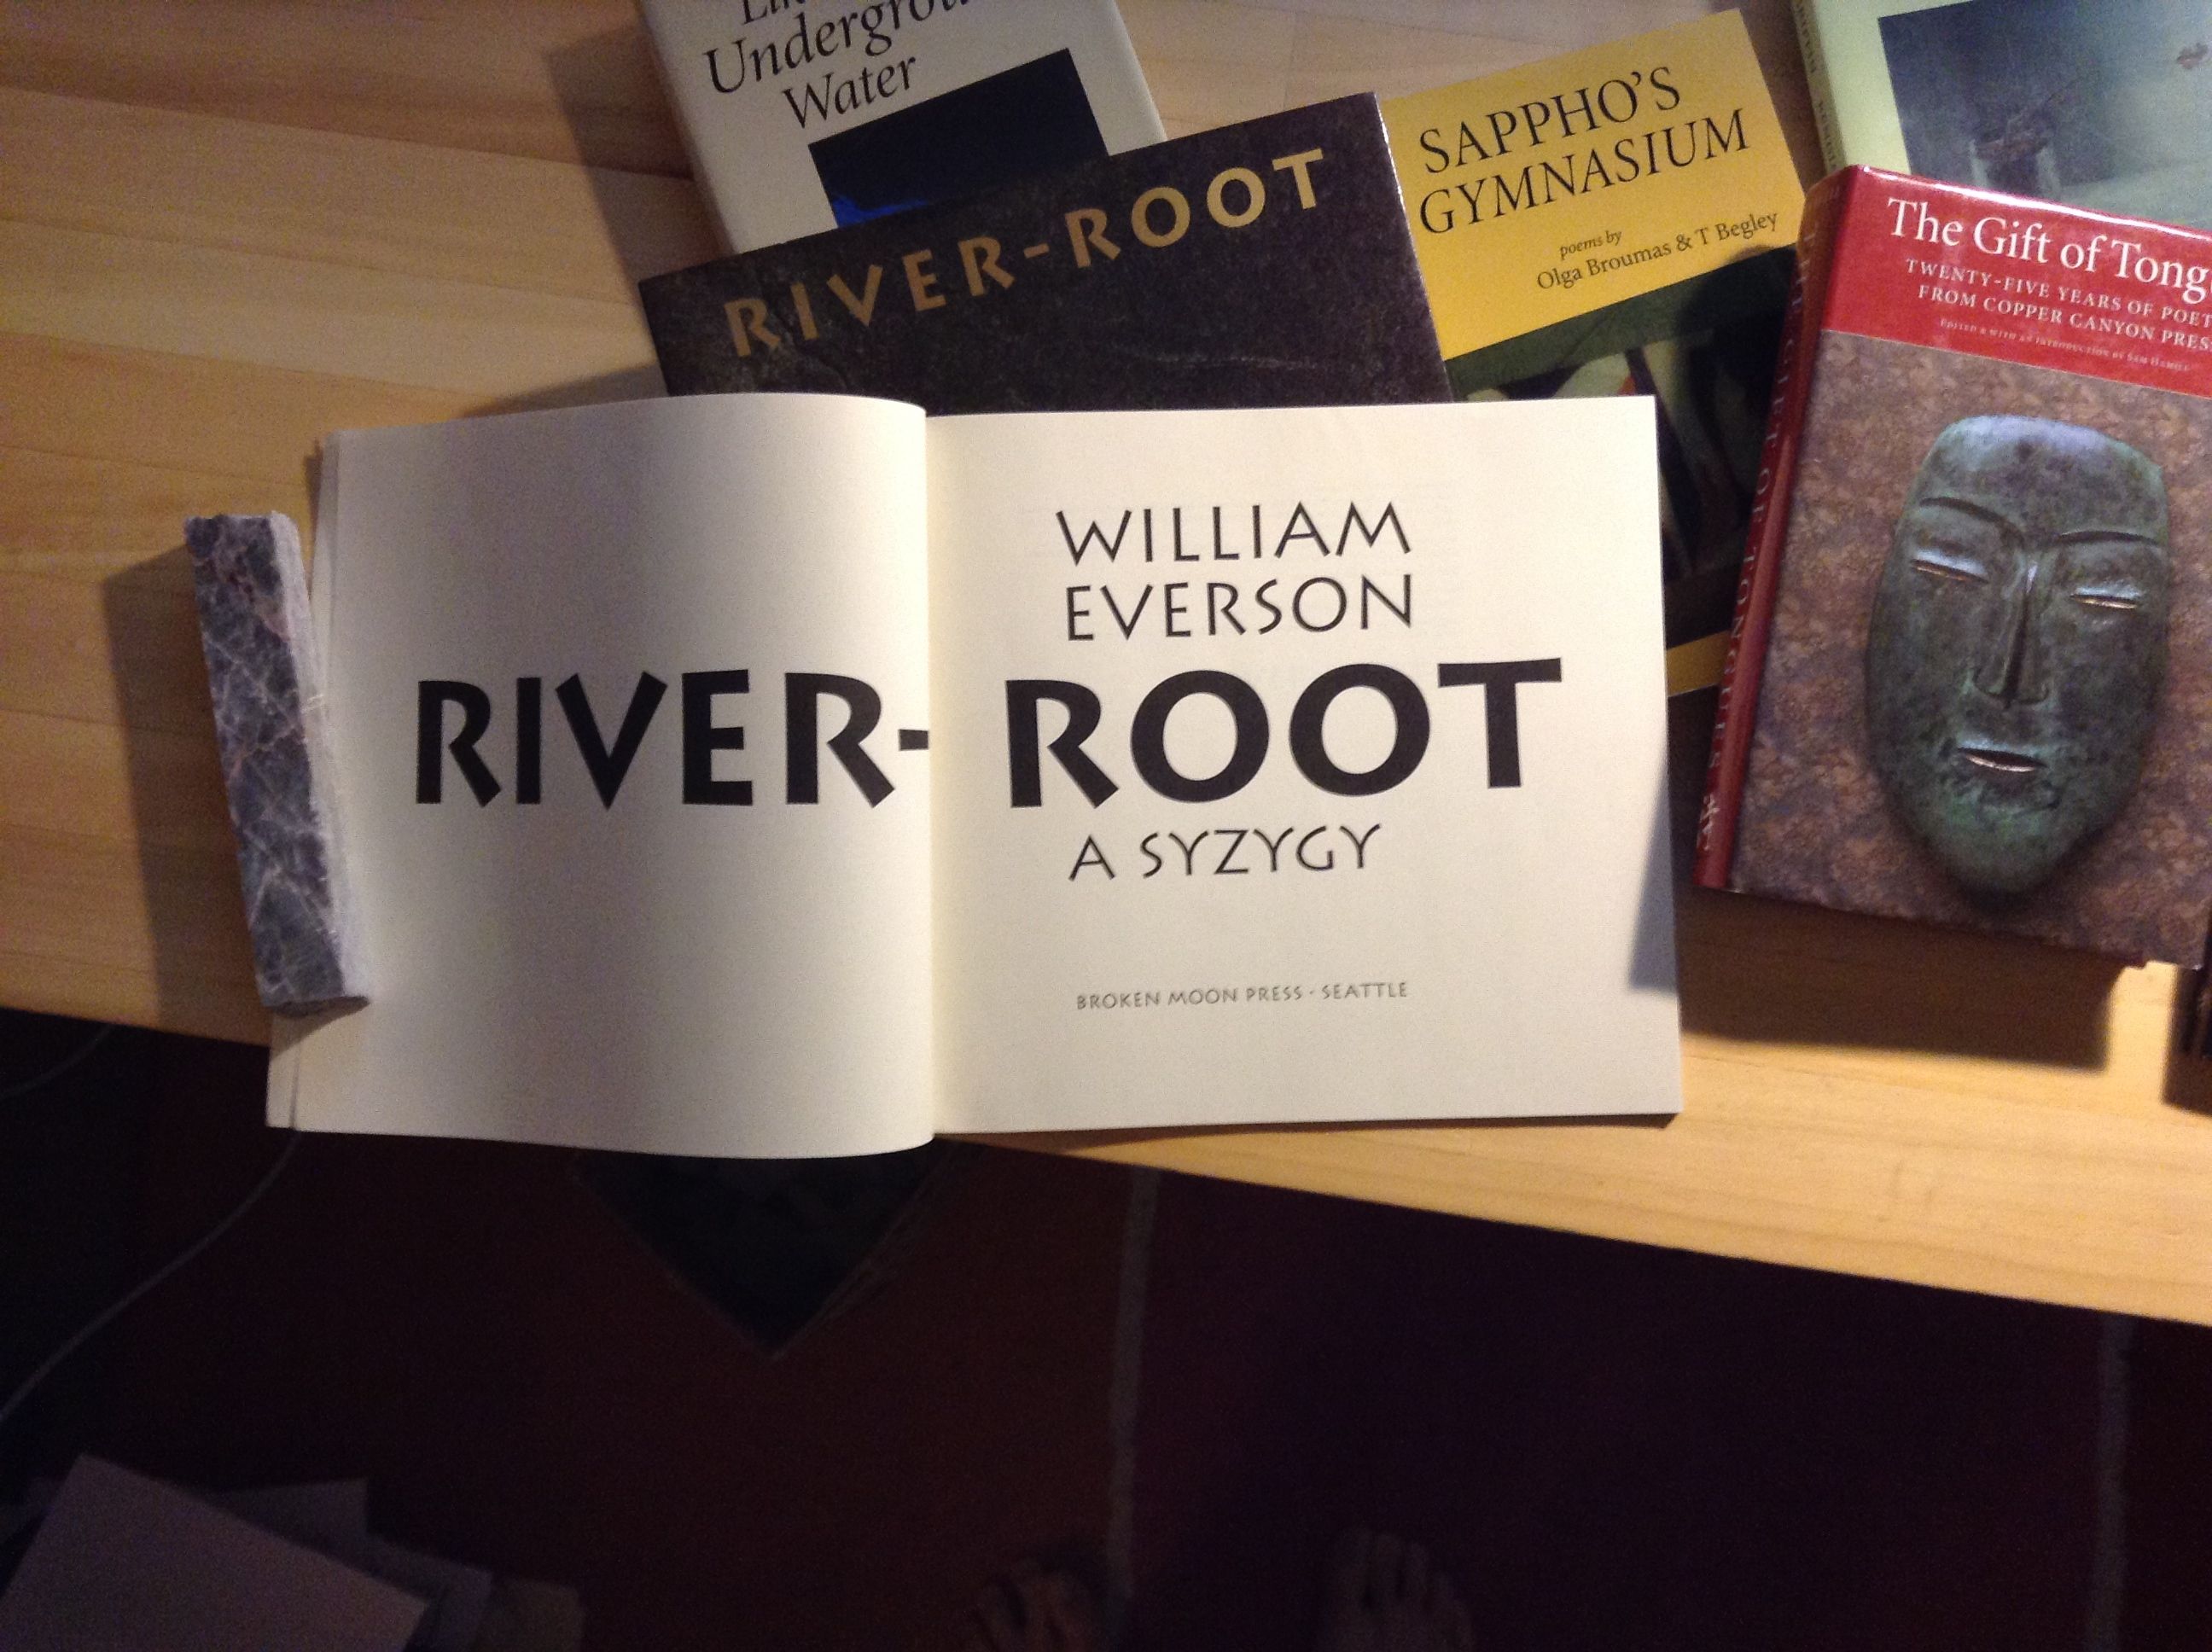 Carol Twombly’s Lithos is featured in this Broken Moon Press edition of William Everson’s “River-Root,” designed by John D. Berry.